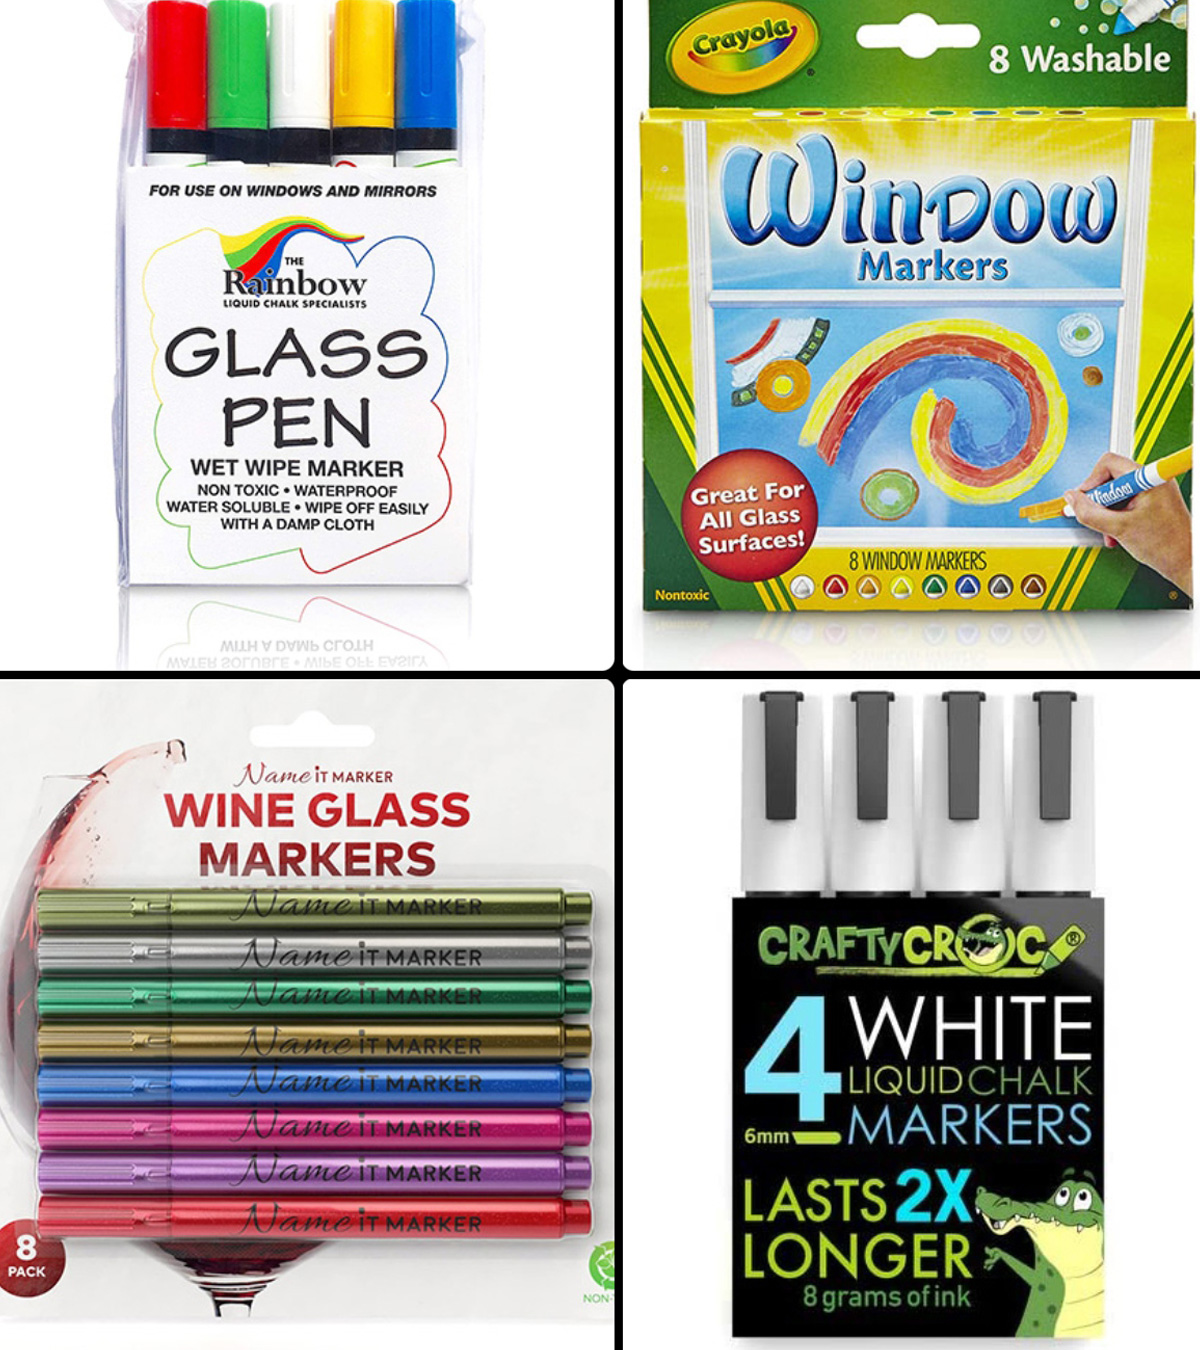 YOUR GUIDE TO PERFECT PAPER FOR ALCOHOL-BASED MARKERS